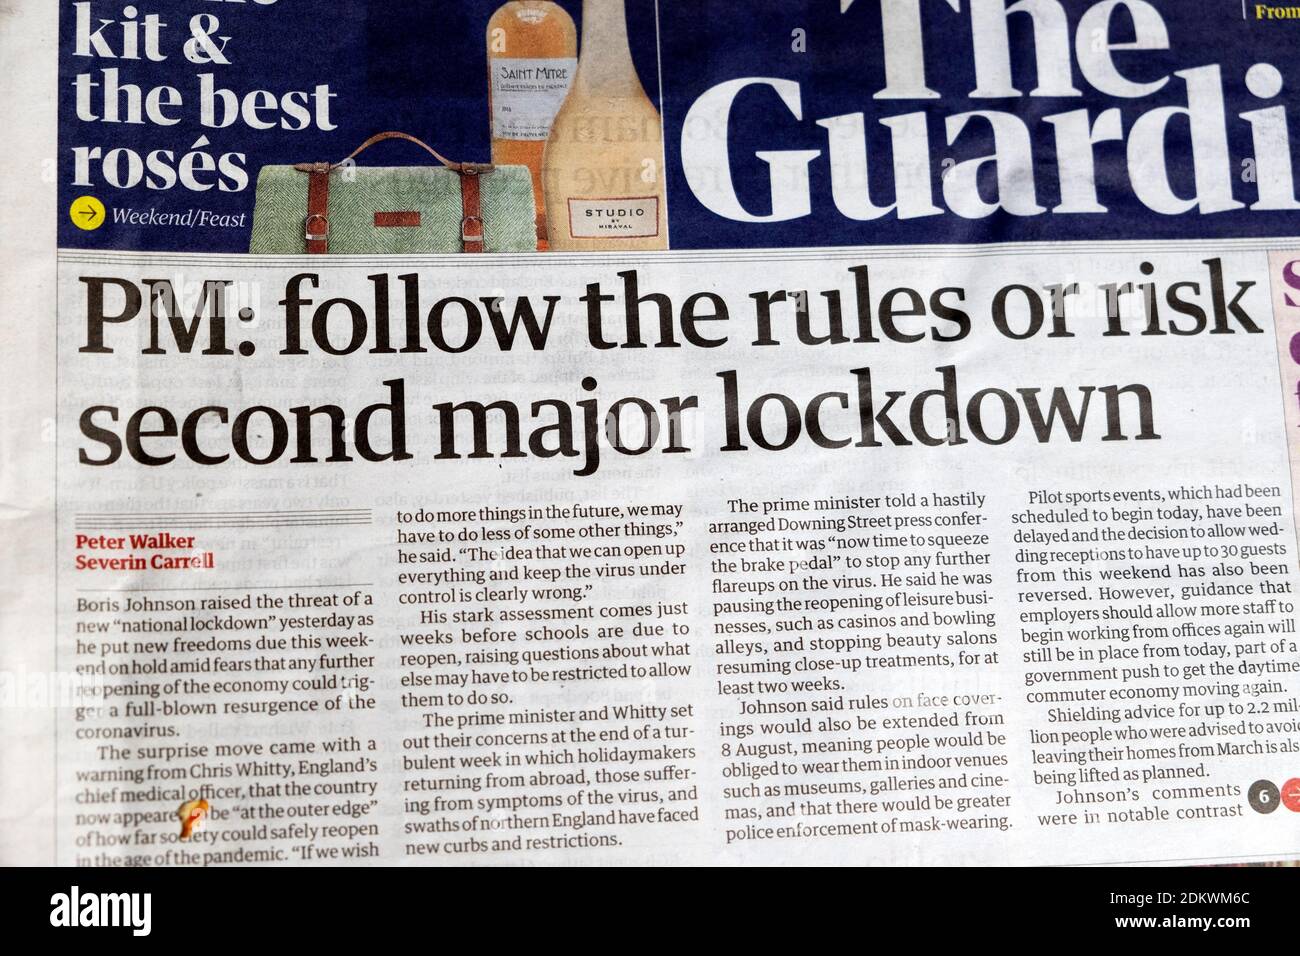 Boris Johnson 'PM: follow the rules or risk second major lockdown' Guardian newspaper front page second wave headline 22 September London England UK Stock Photo